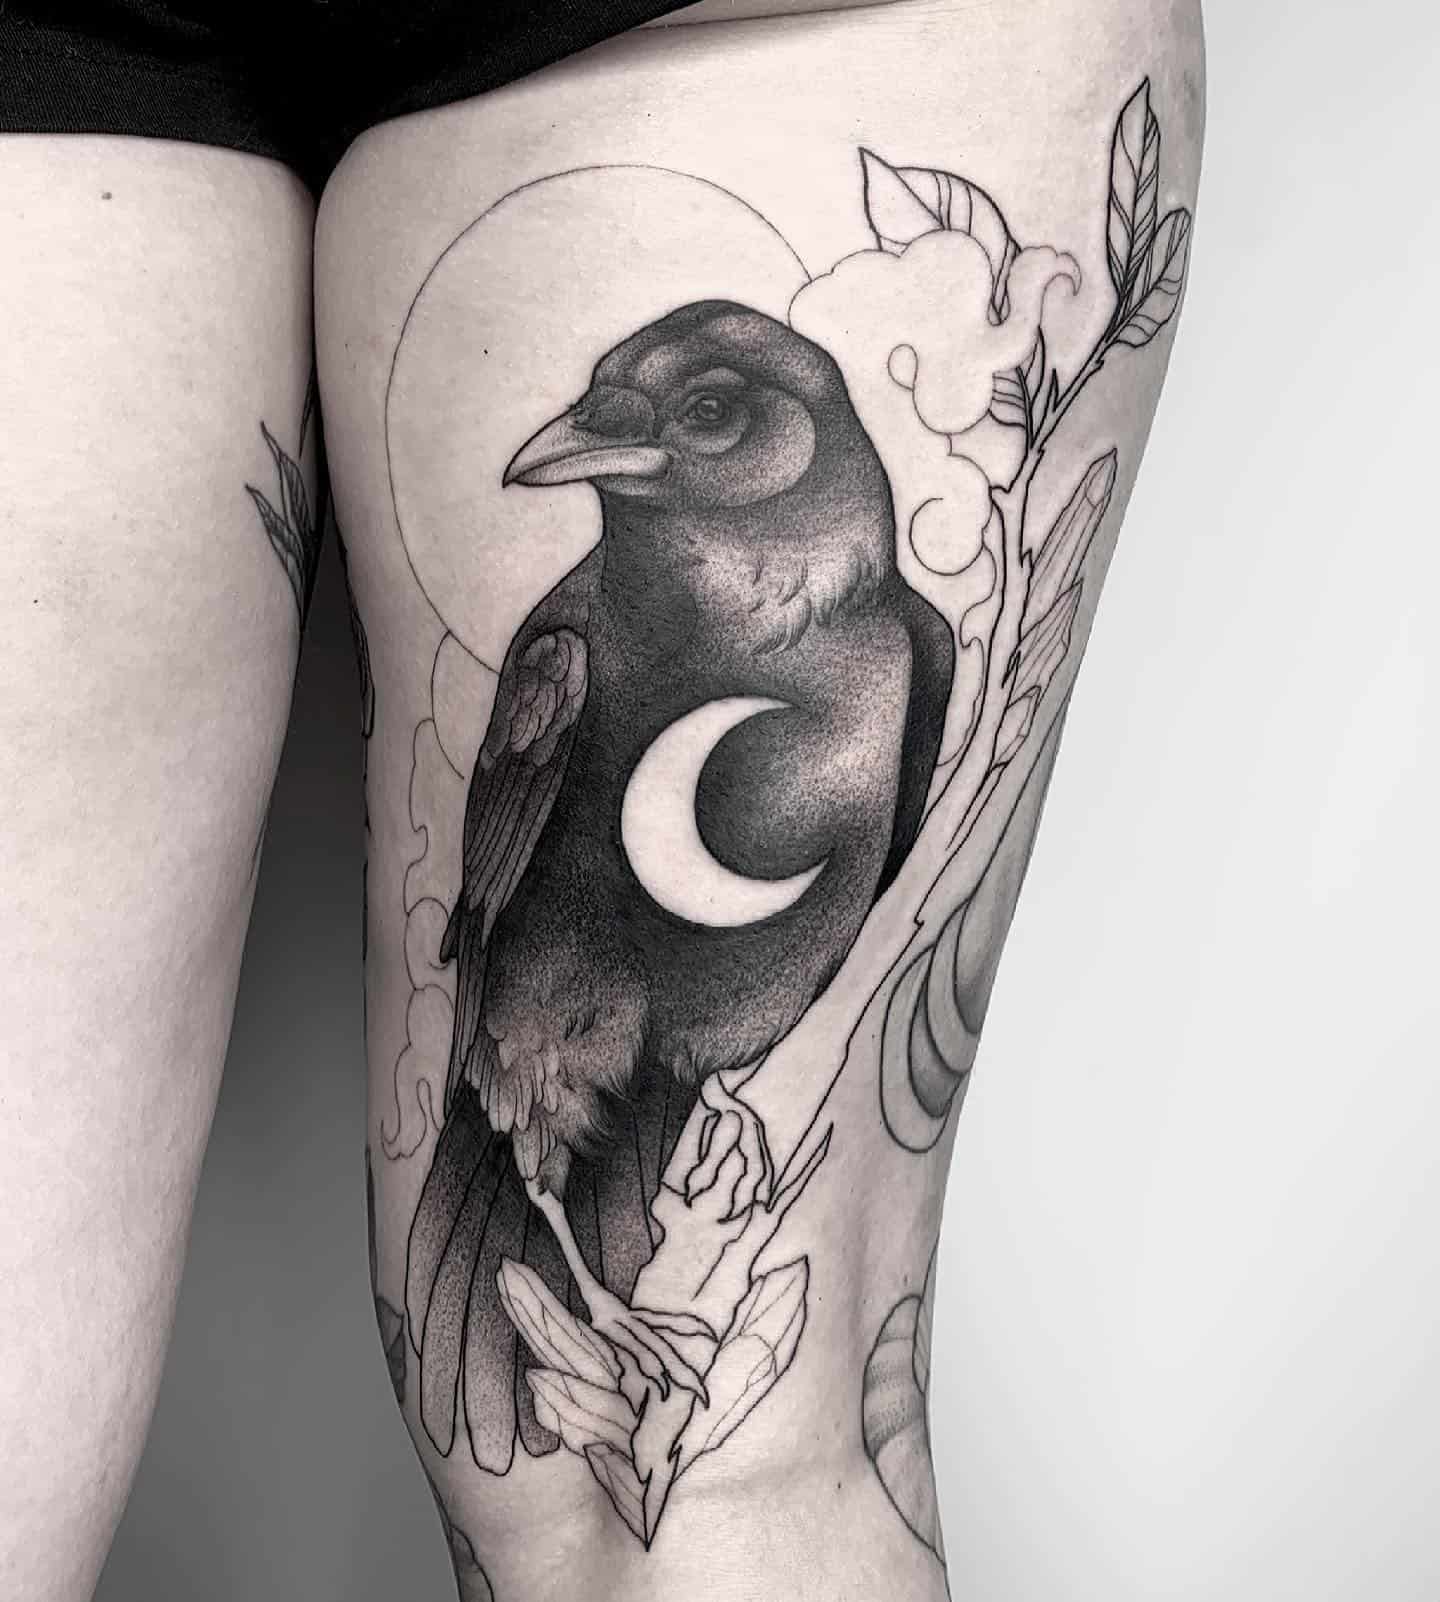 The Meaning of Birds in Tattoos: The Intricate Meanings Behind Popular Tattoo Styles and Symbols